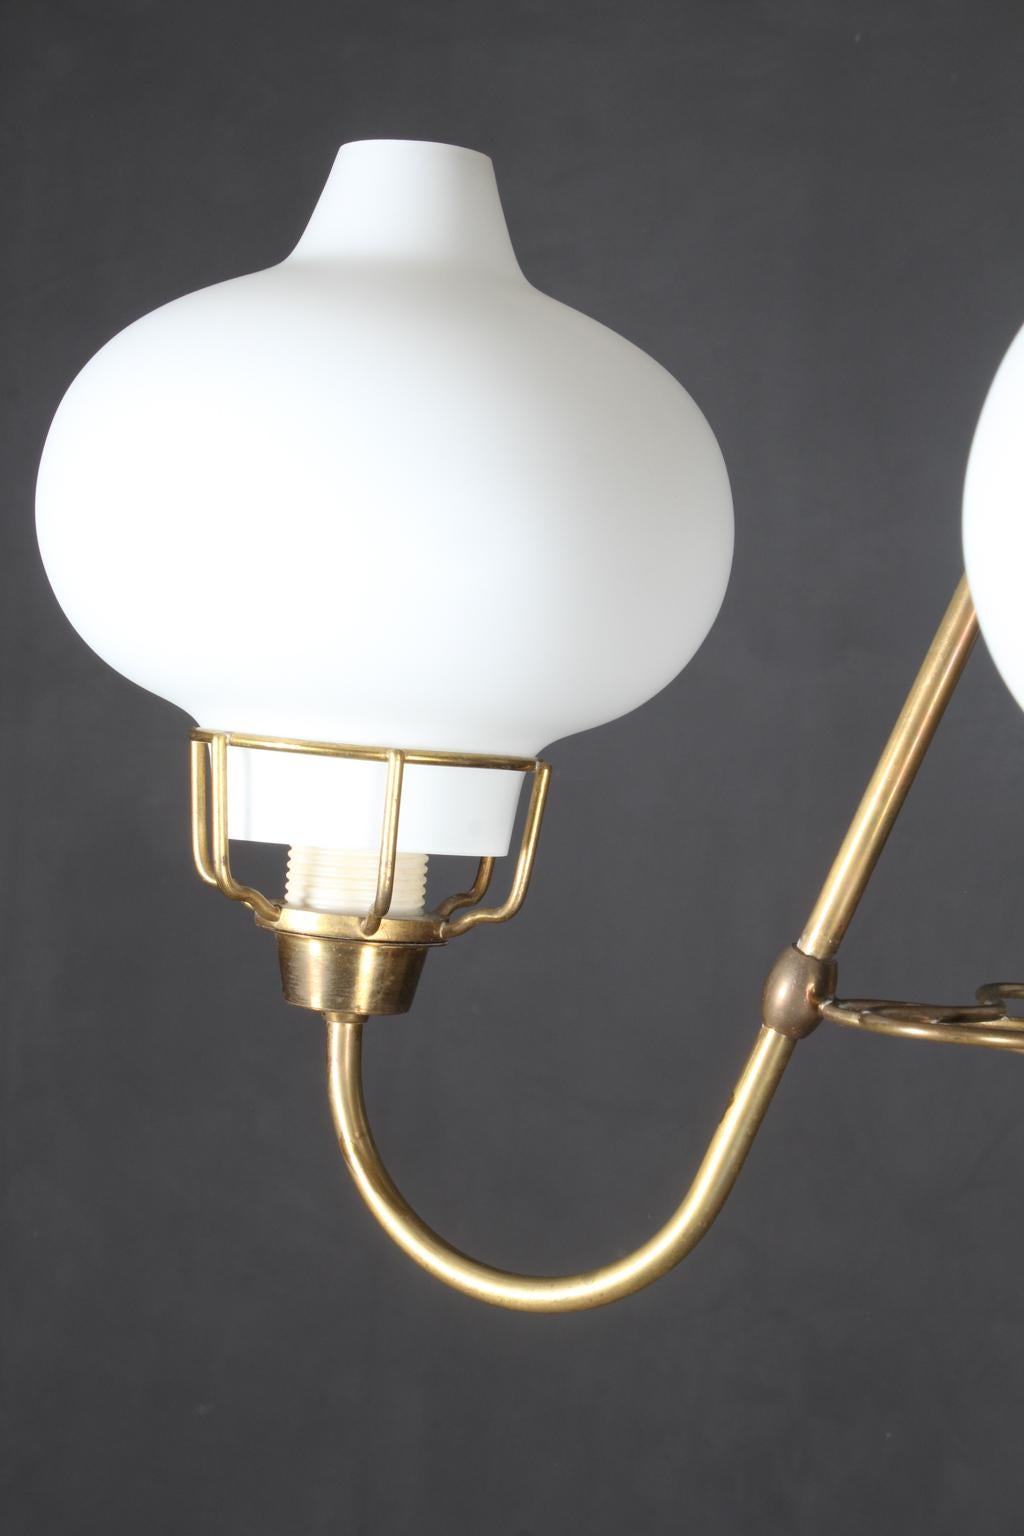 Bent Karlby pendant in opal glass and brass. Three light sources.

Made by Lyfa.